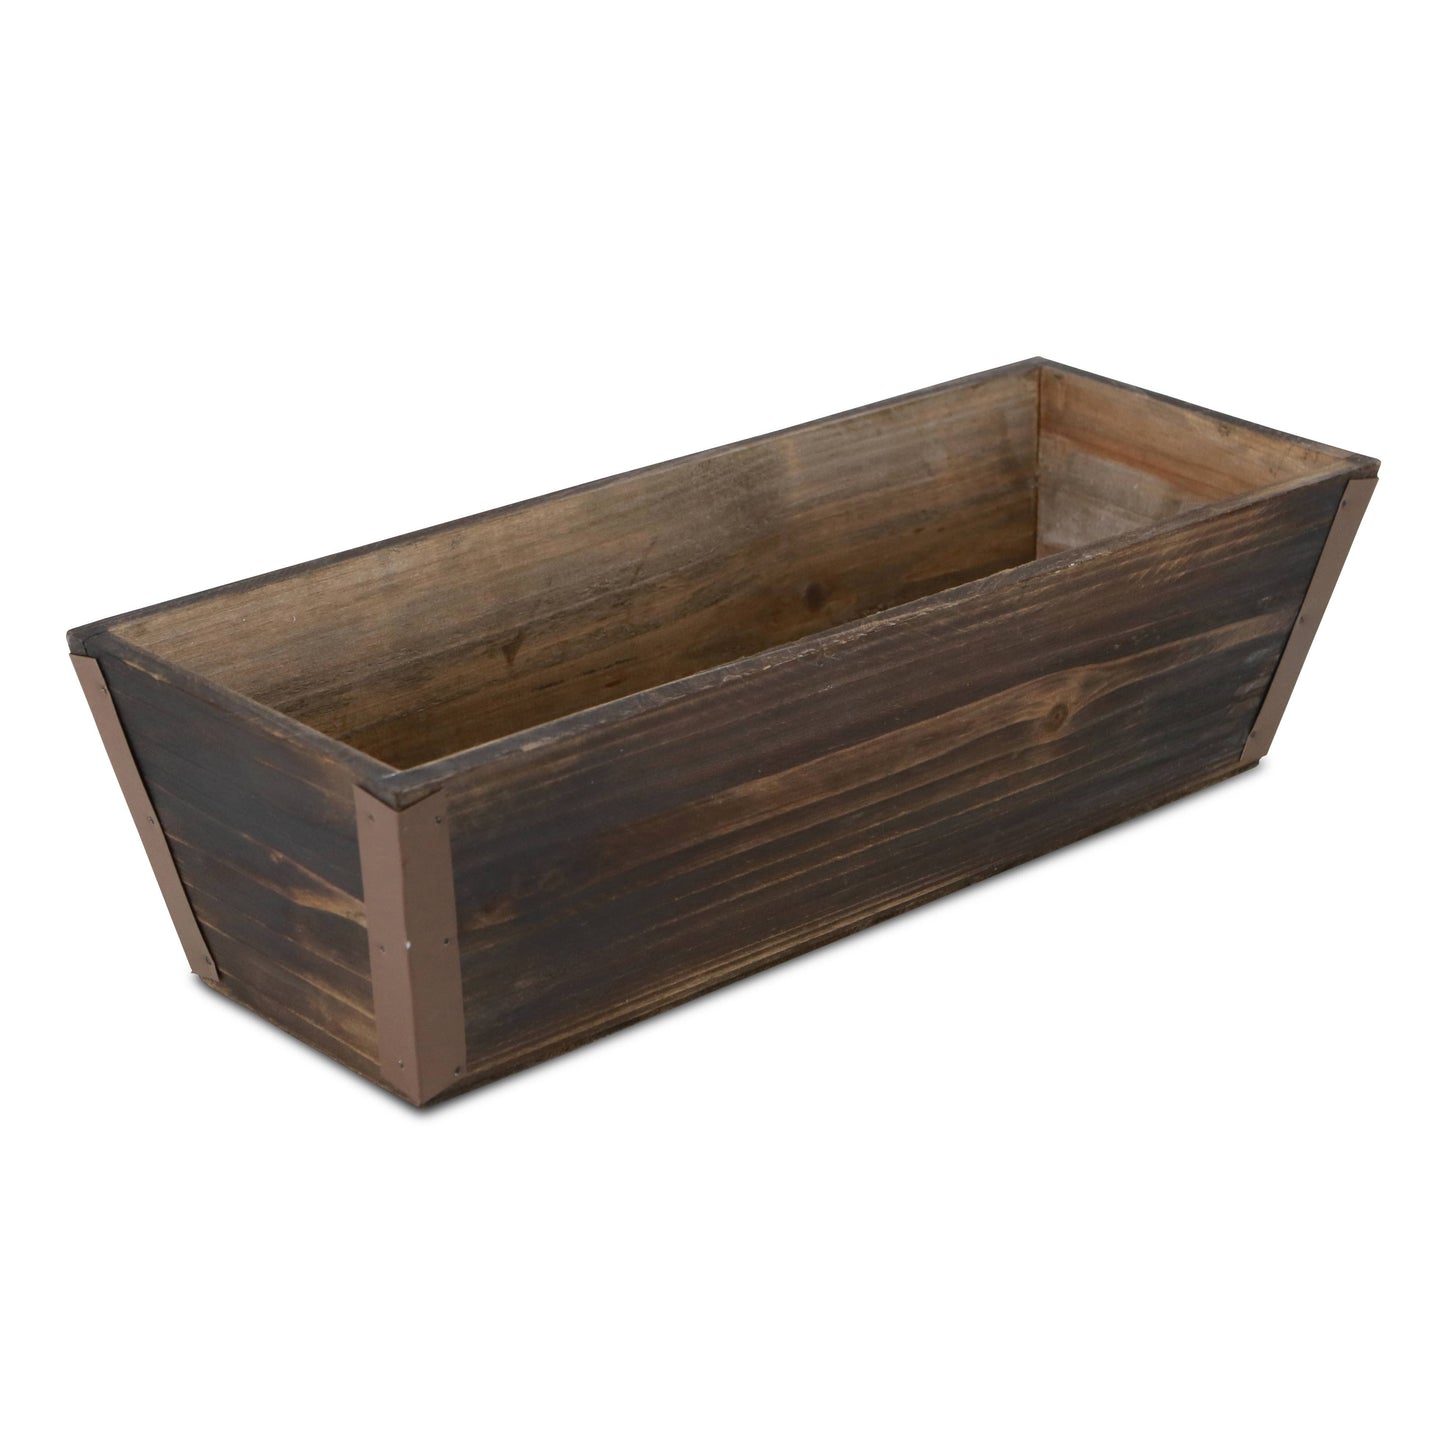 Brown Wooden Ledge Planter - small